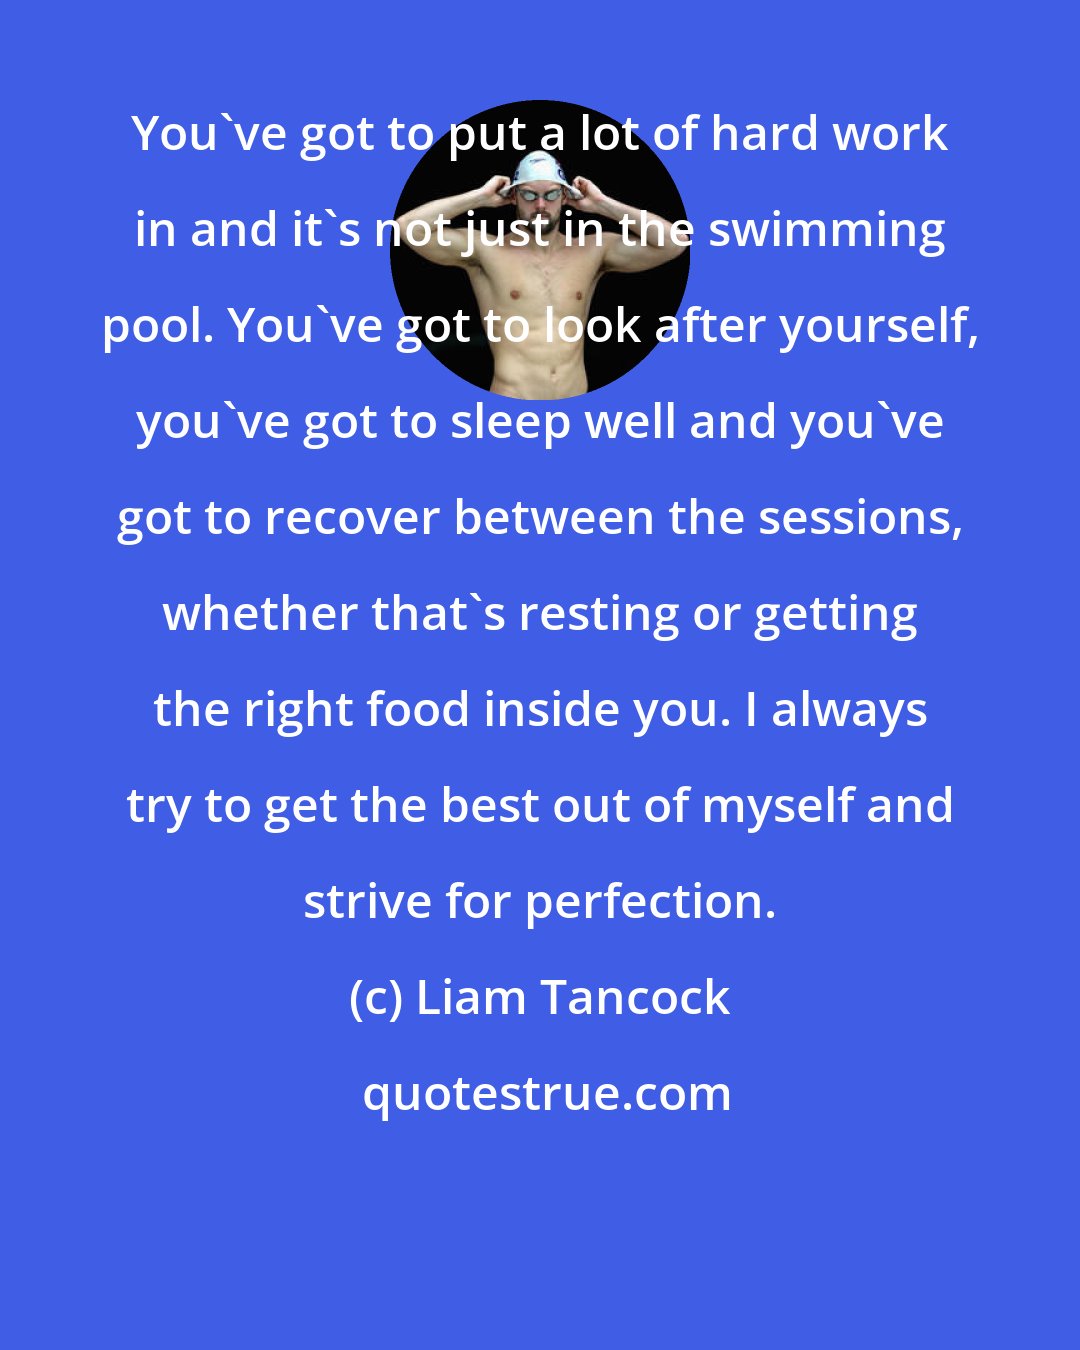 Liam Tancock: You've got to put a lot of hard work in and it's not just in the swimming pool. You've got to look after yourself, you've got to sleep well and you've got to recover between the sessions, whether that's resting or getting the right food inside you. I always try to get the best out of myself and strive for perfection.